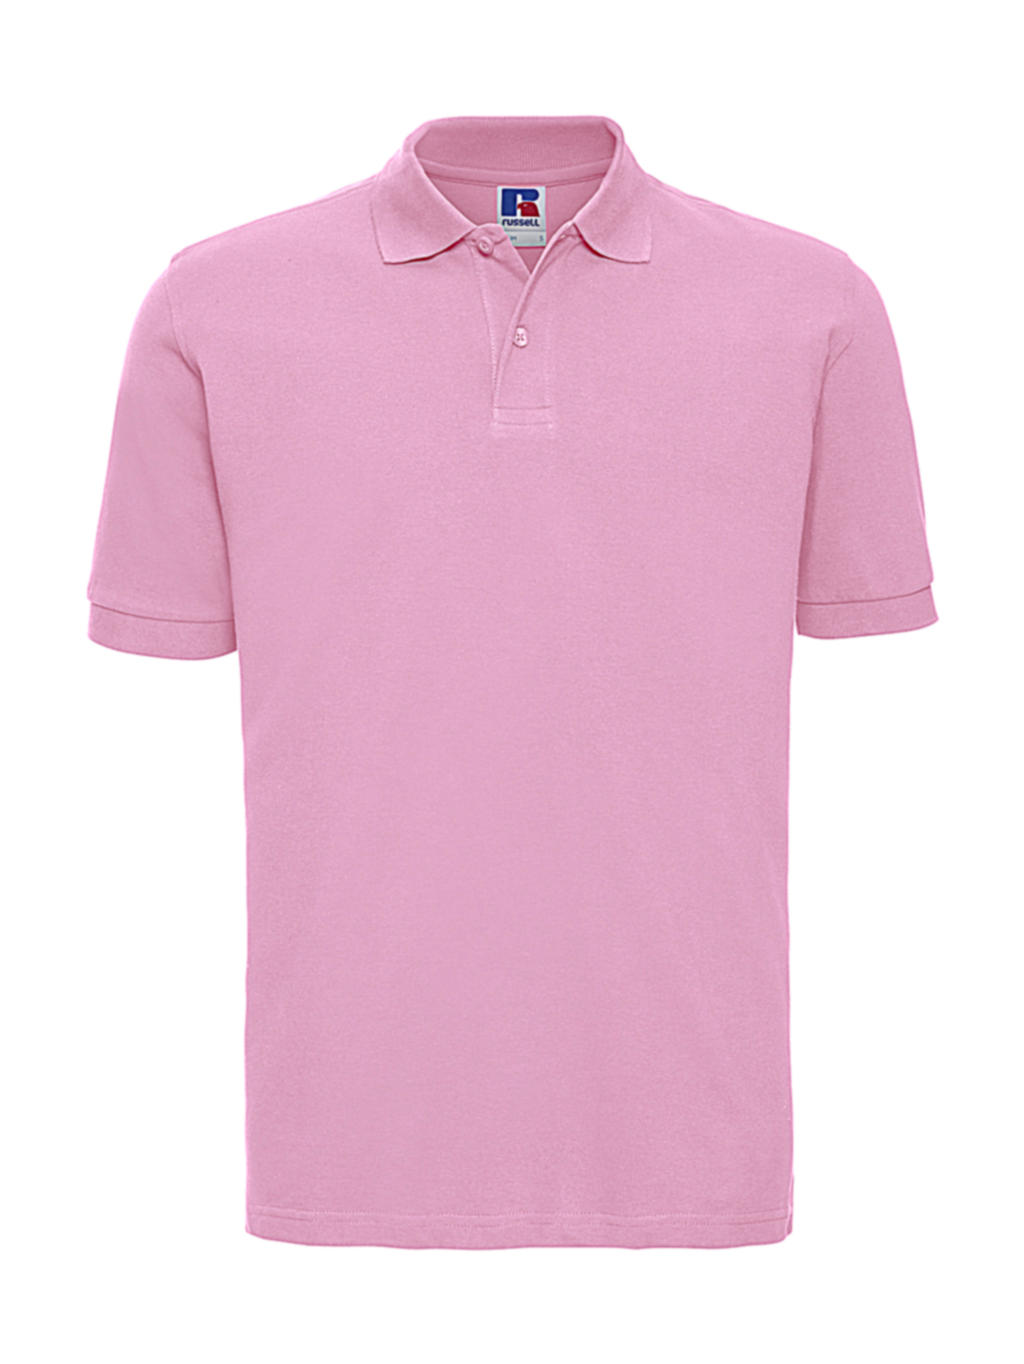  Mens Classic Cotton Polo in Farbe Candy Pink